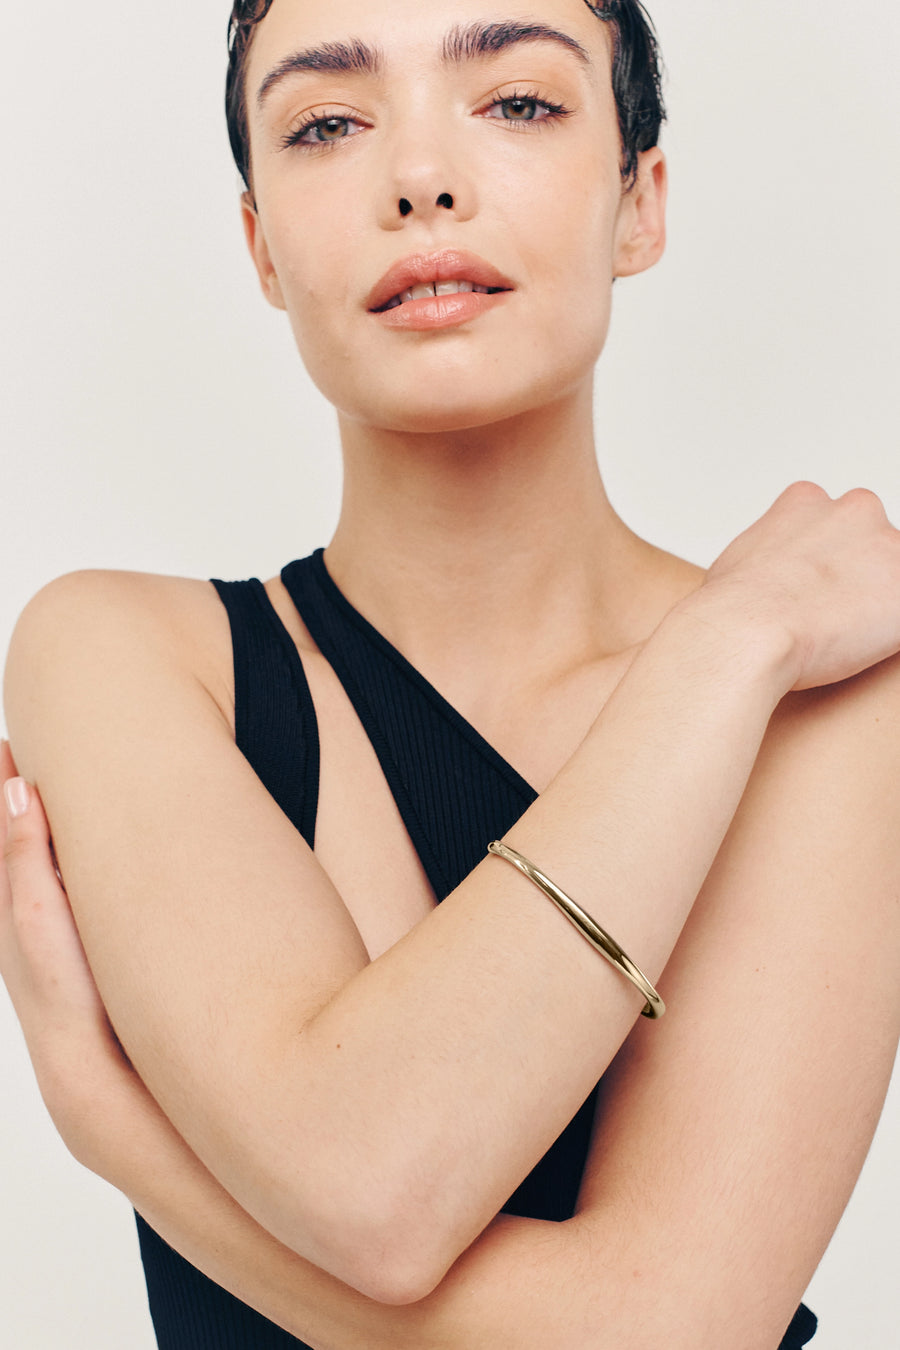 ETHEREAL Cuff. Oval-shaped open-ended band cuff bracelet, 18K gold vermeil, handmade, hypoallergenic, water-resistant